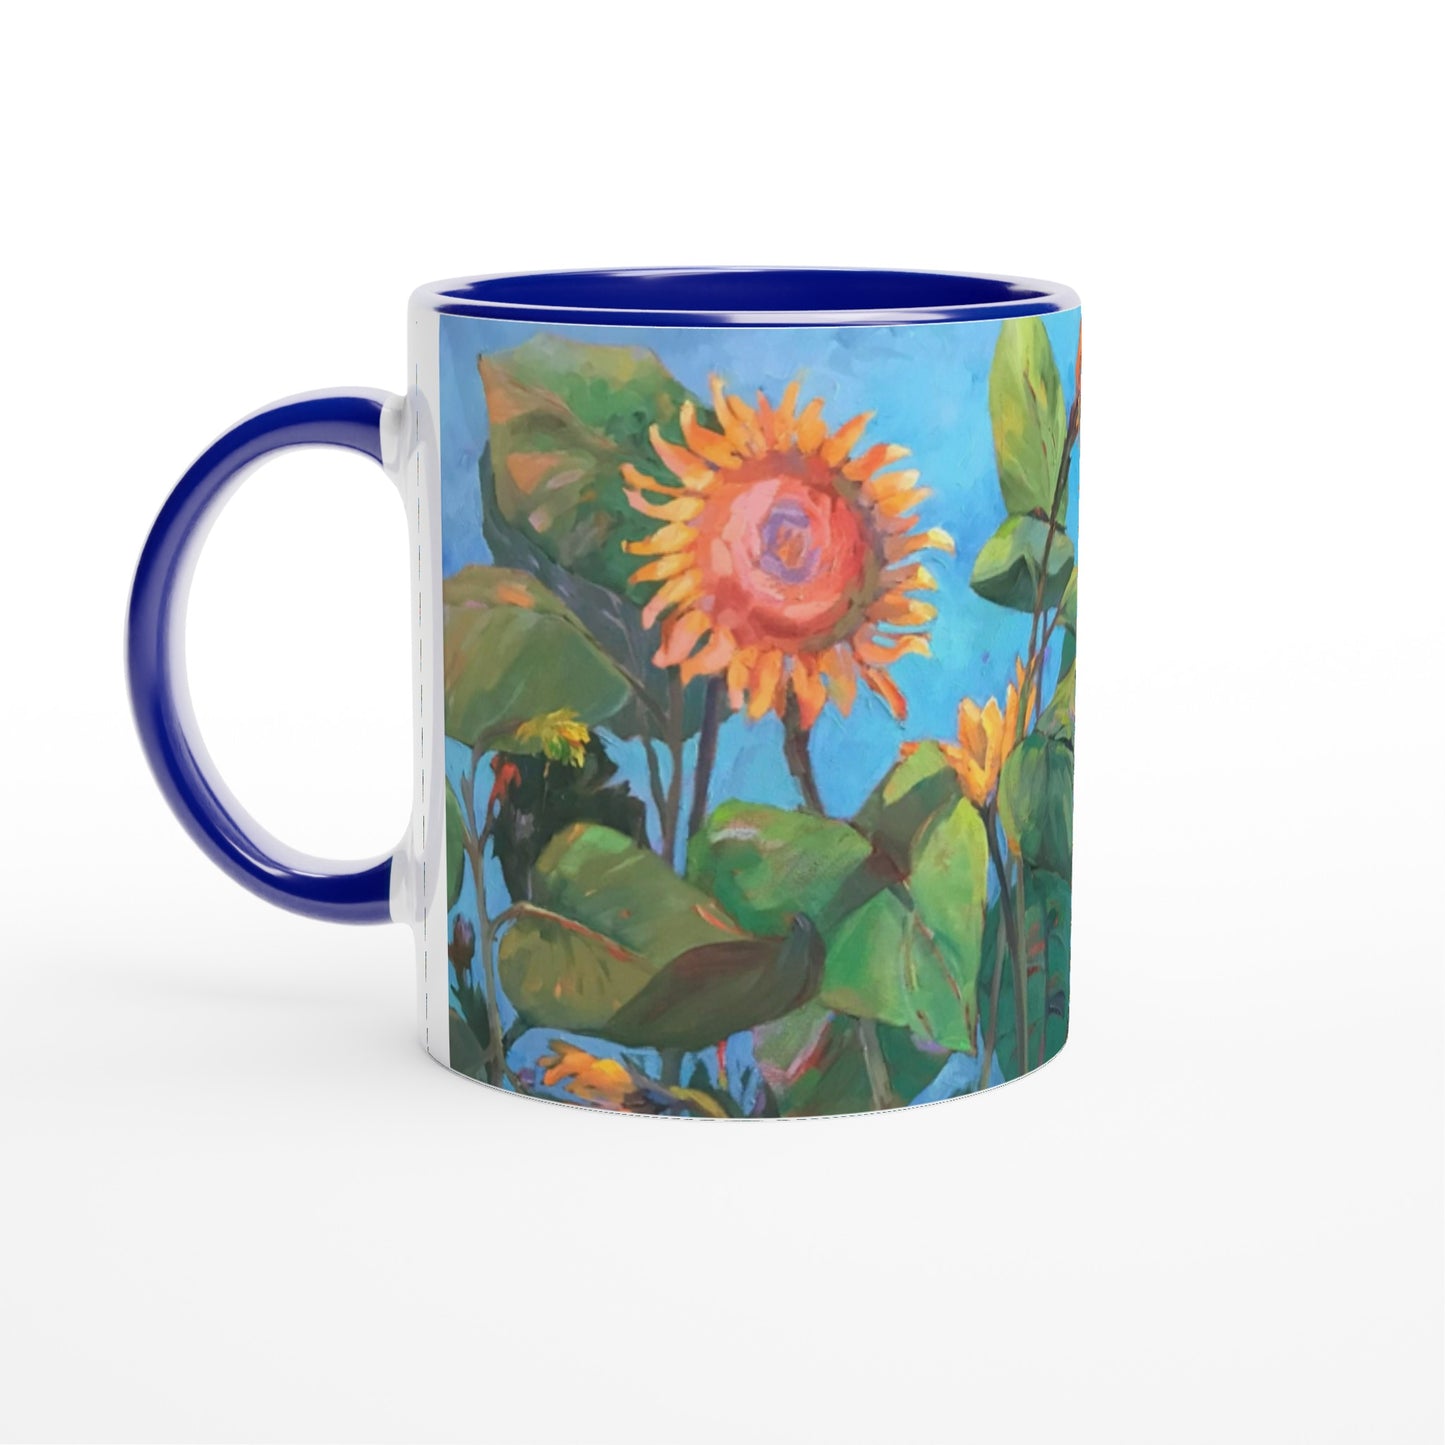 "Southwind 2" Sunflowers Floral White 11oz Ceramic Mug with Color Inside by Barbara Cleary Designs